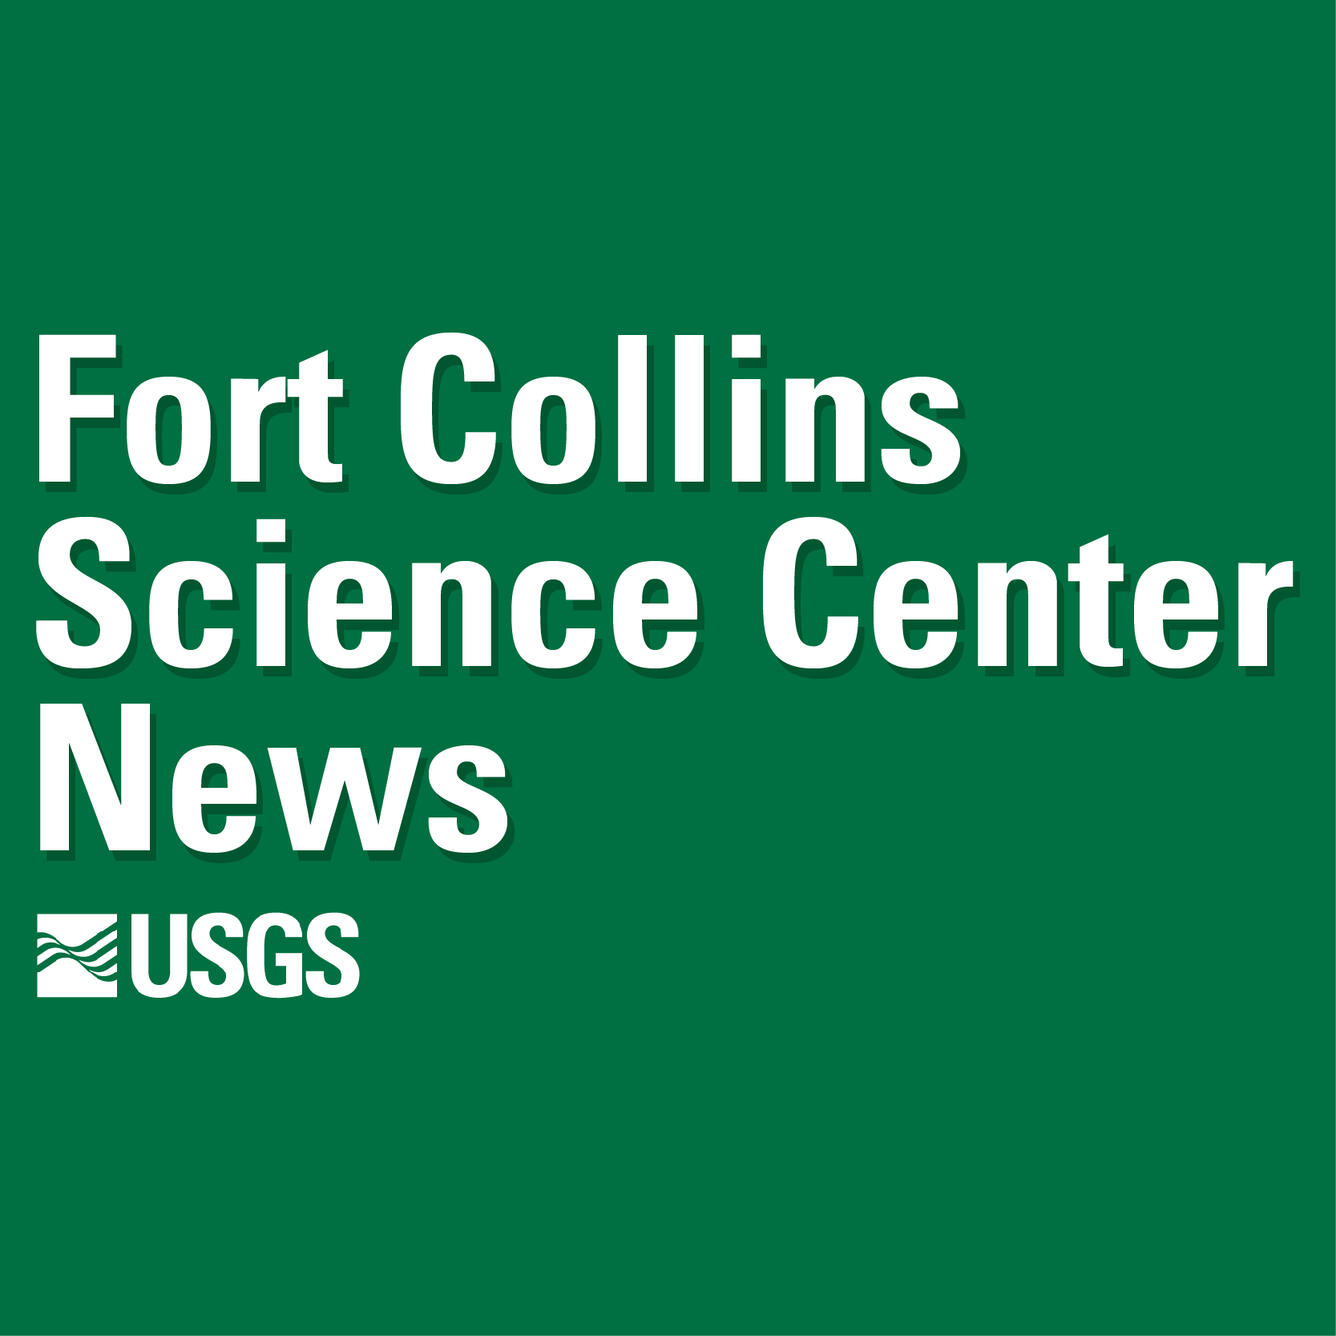 Fort Collins Science Center and USGS Logo Stock Image